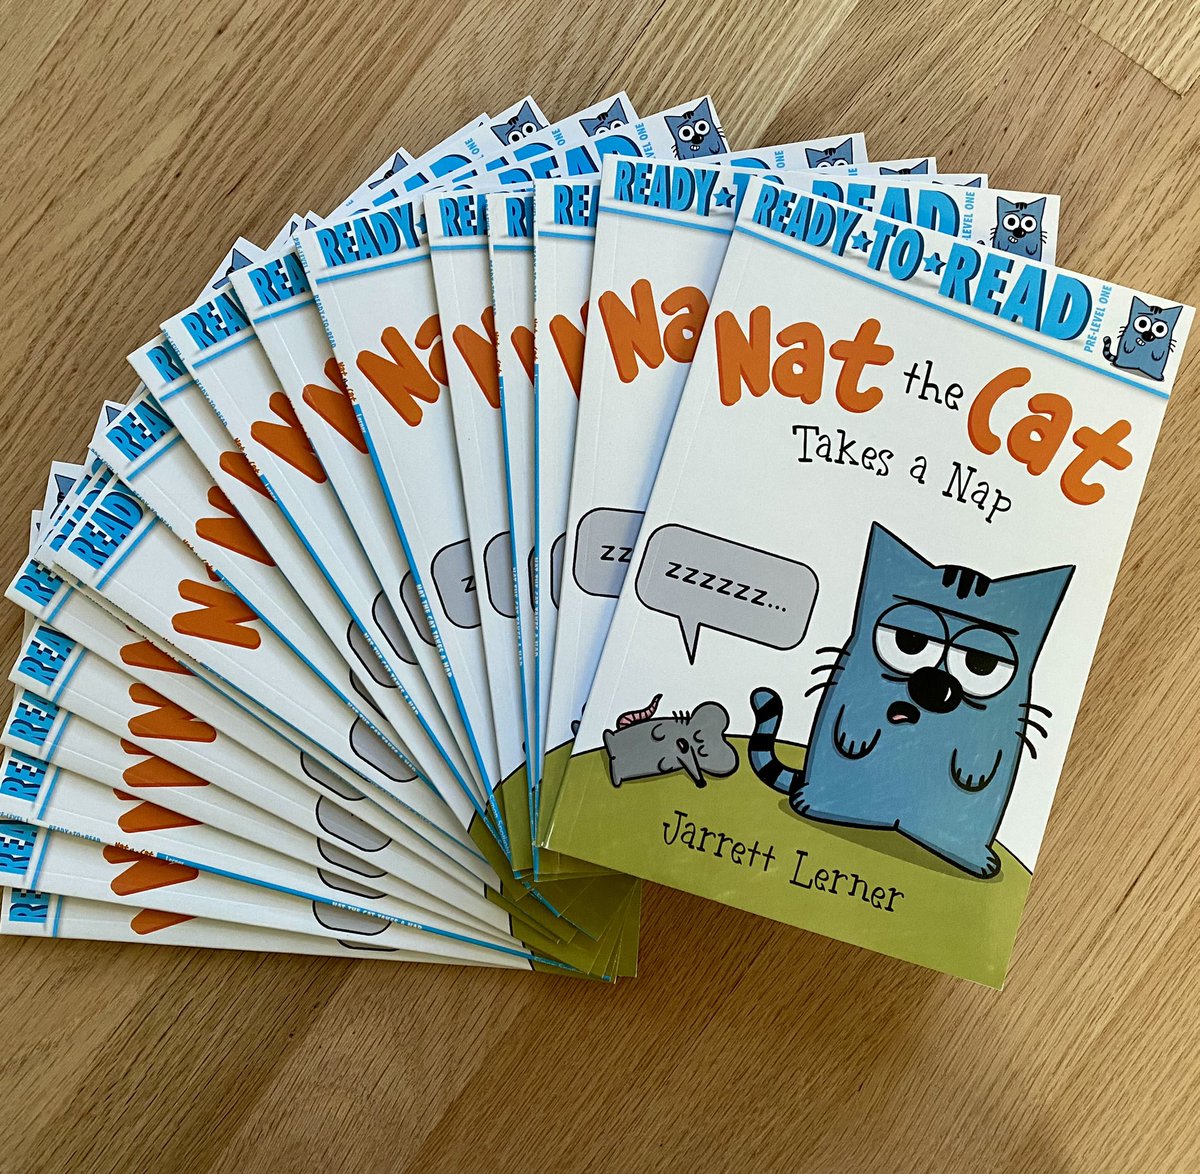 I have an extra class set of Nat the Cat Takes a Nap that needs a new home. Teachers and librarians: to win these books, RT/like this tweet and follow me. I’ll pick a winner next week! *I will never DM you to ask for personal info related to my giveaways. Beware of scammers!*